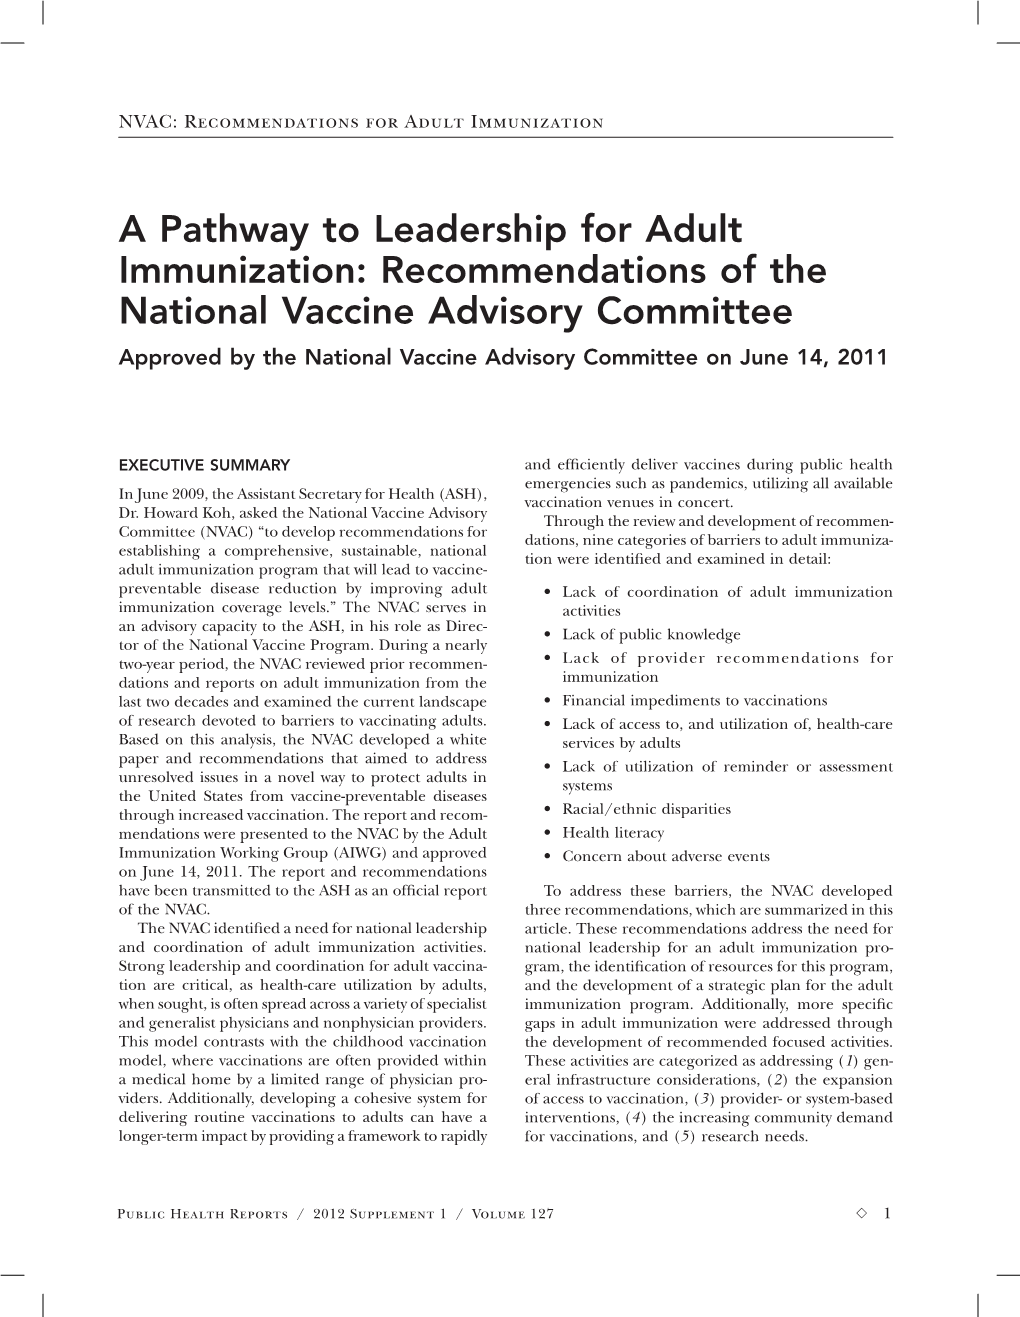 A Pathway to Leadership for Adult Immunization